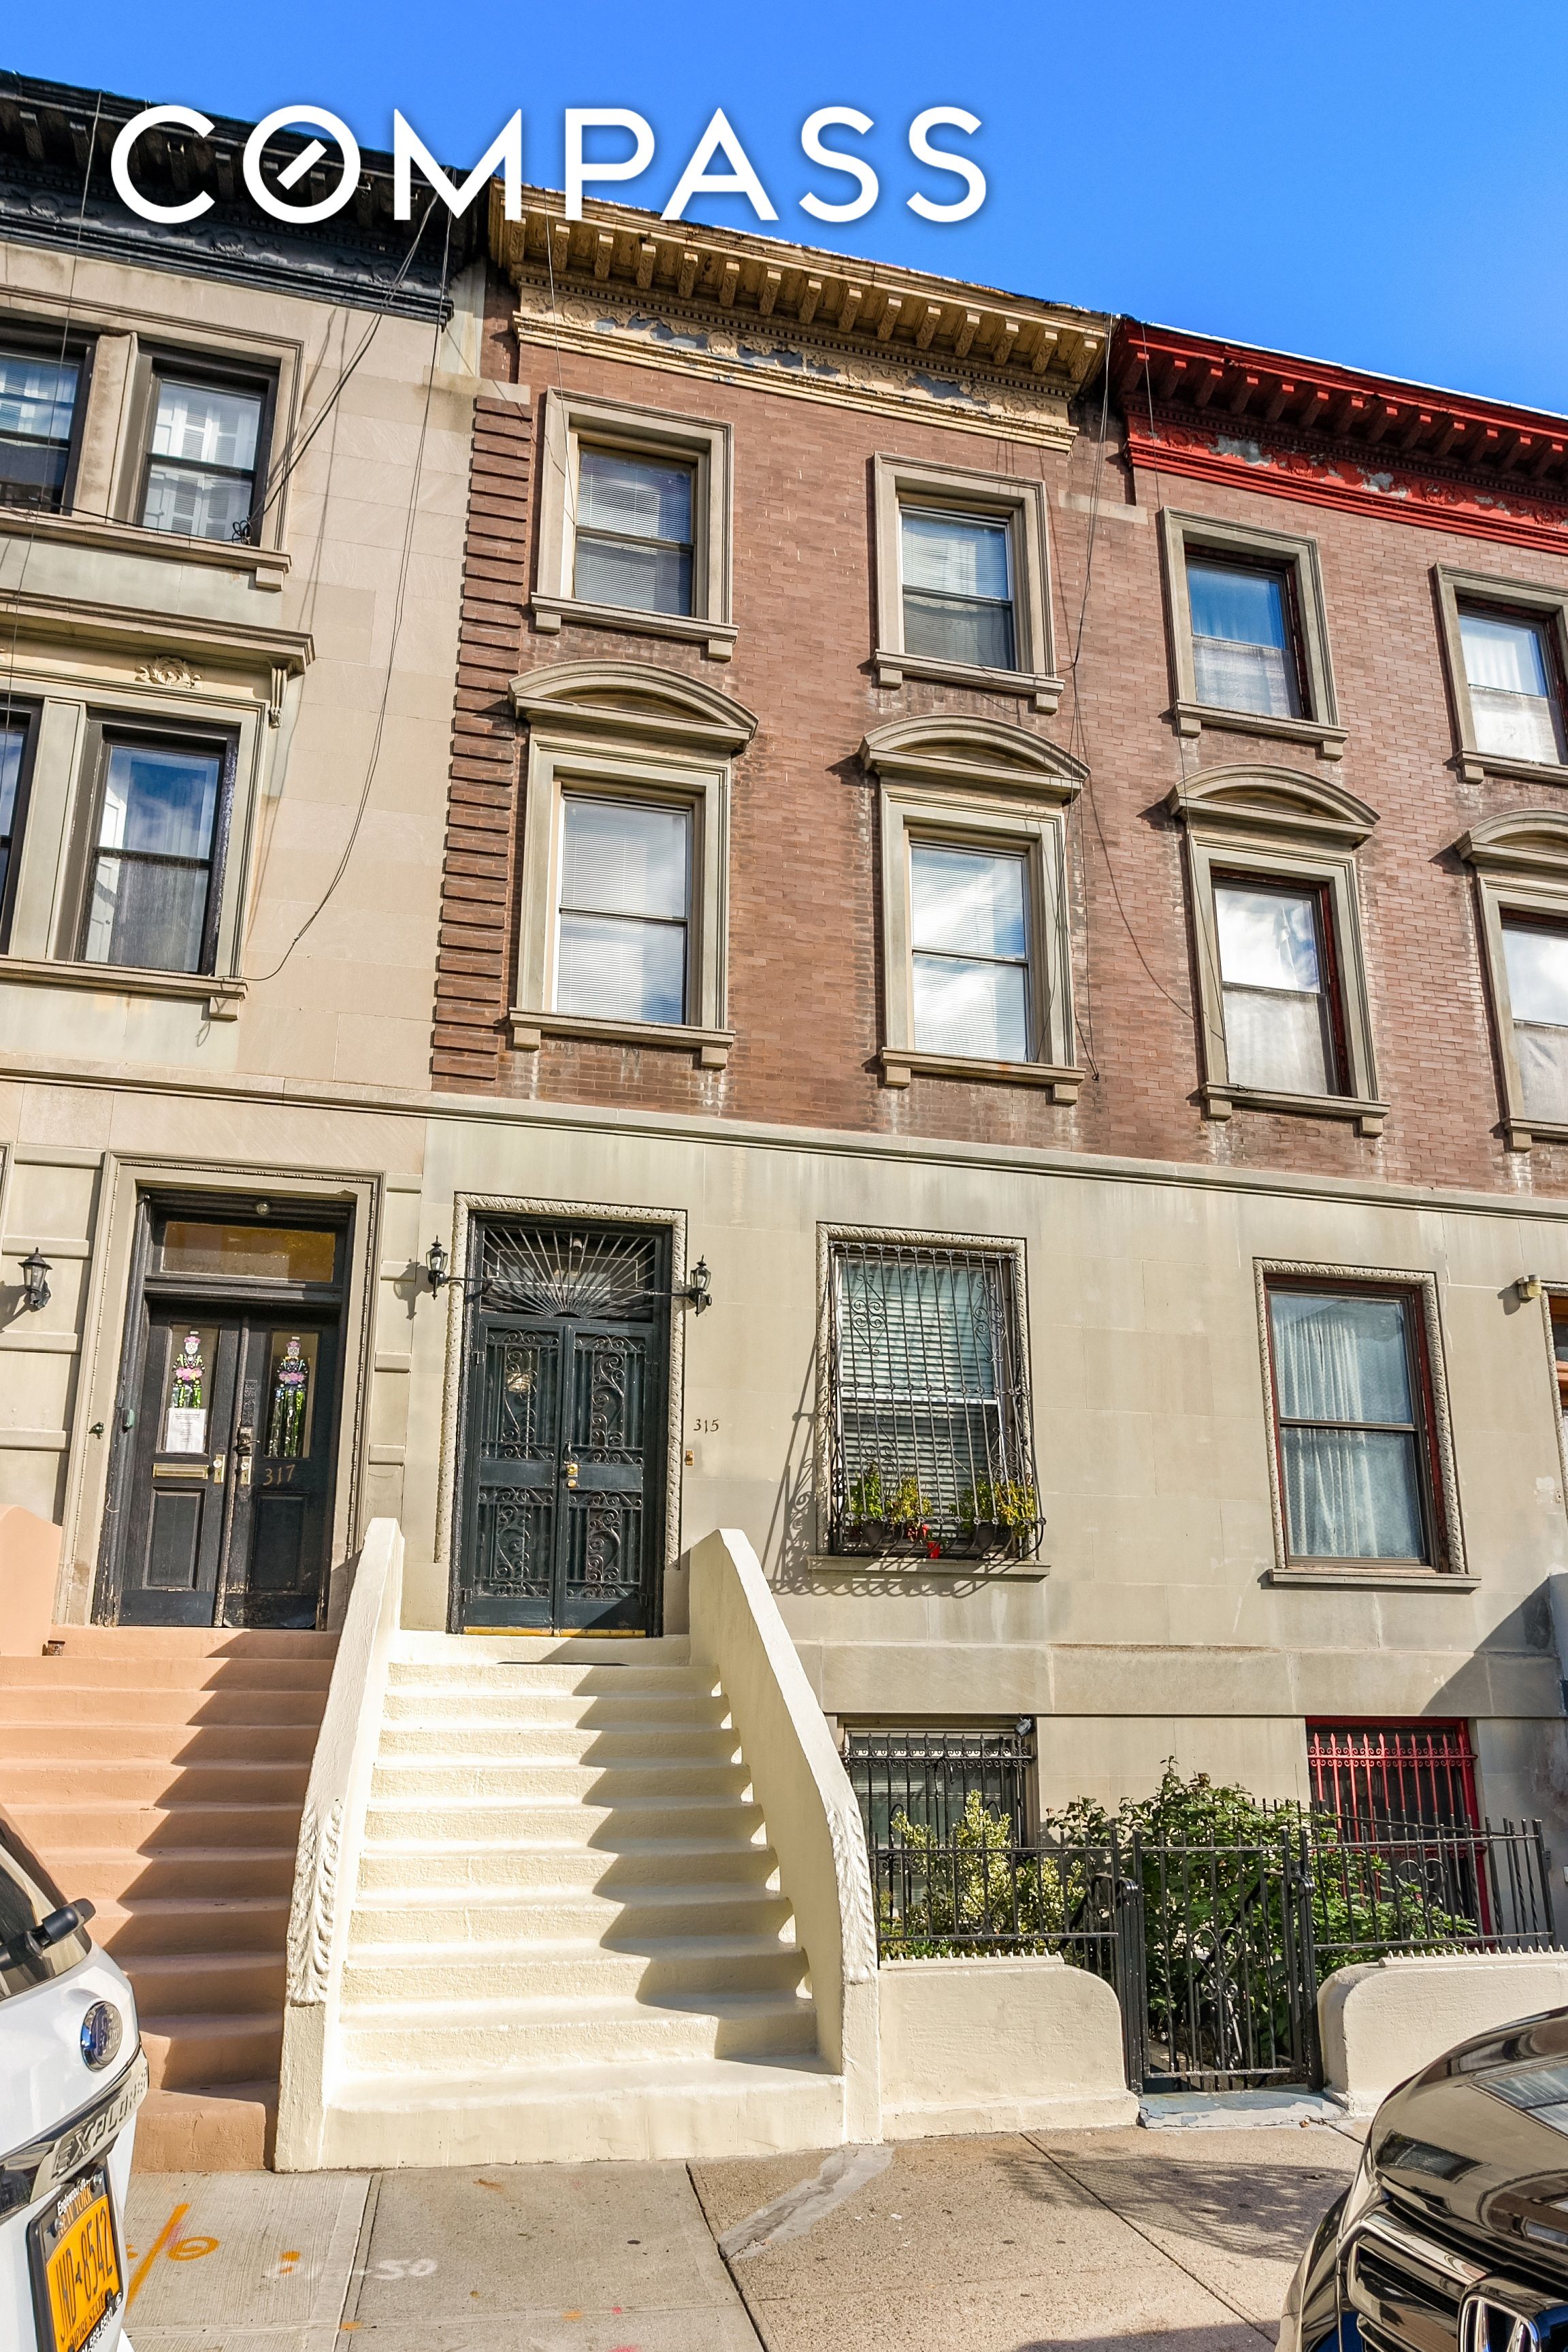 315 West 139th Street, Central Harlem, Upper Manhattan, NYC - 9 Bedrooms  
3.5 Bathrooms  
11 Rooms - 